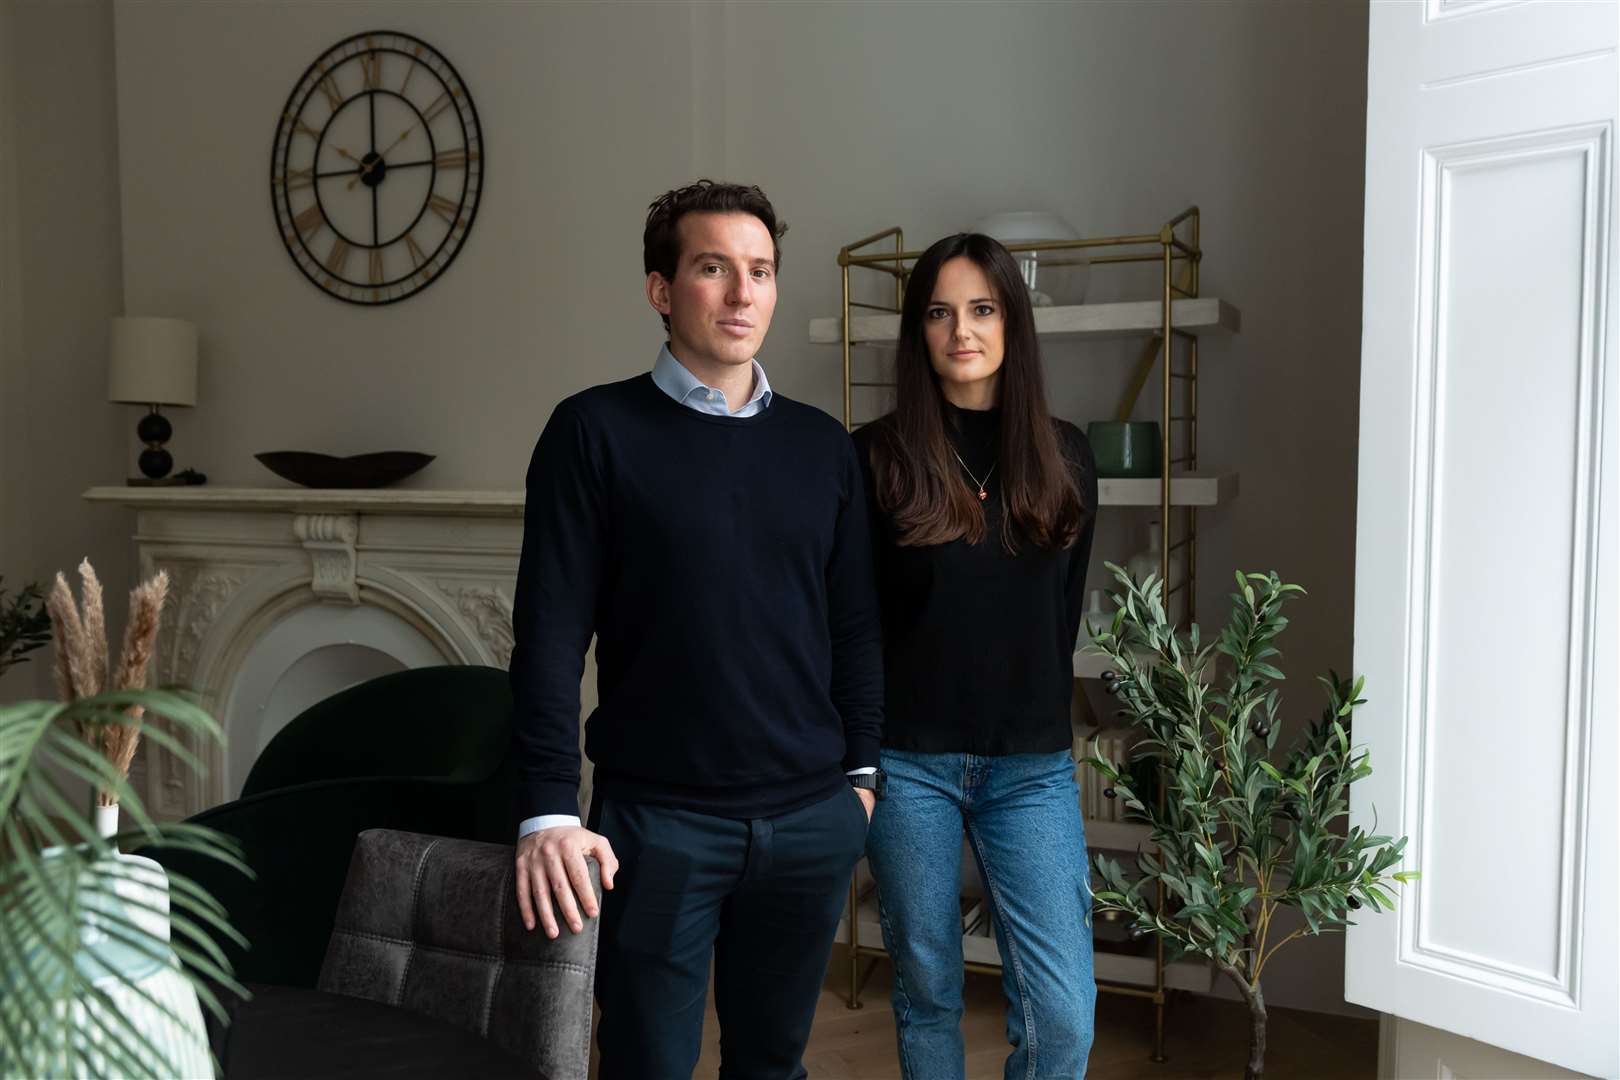 Mr Turnier and Mrs Corell run their architecture company, Arcvelop together. Photo: Marc Turnier